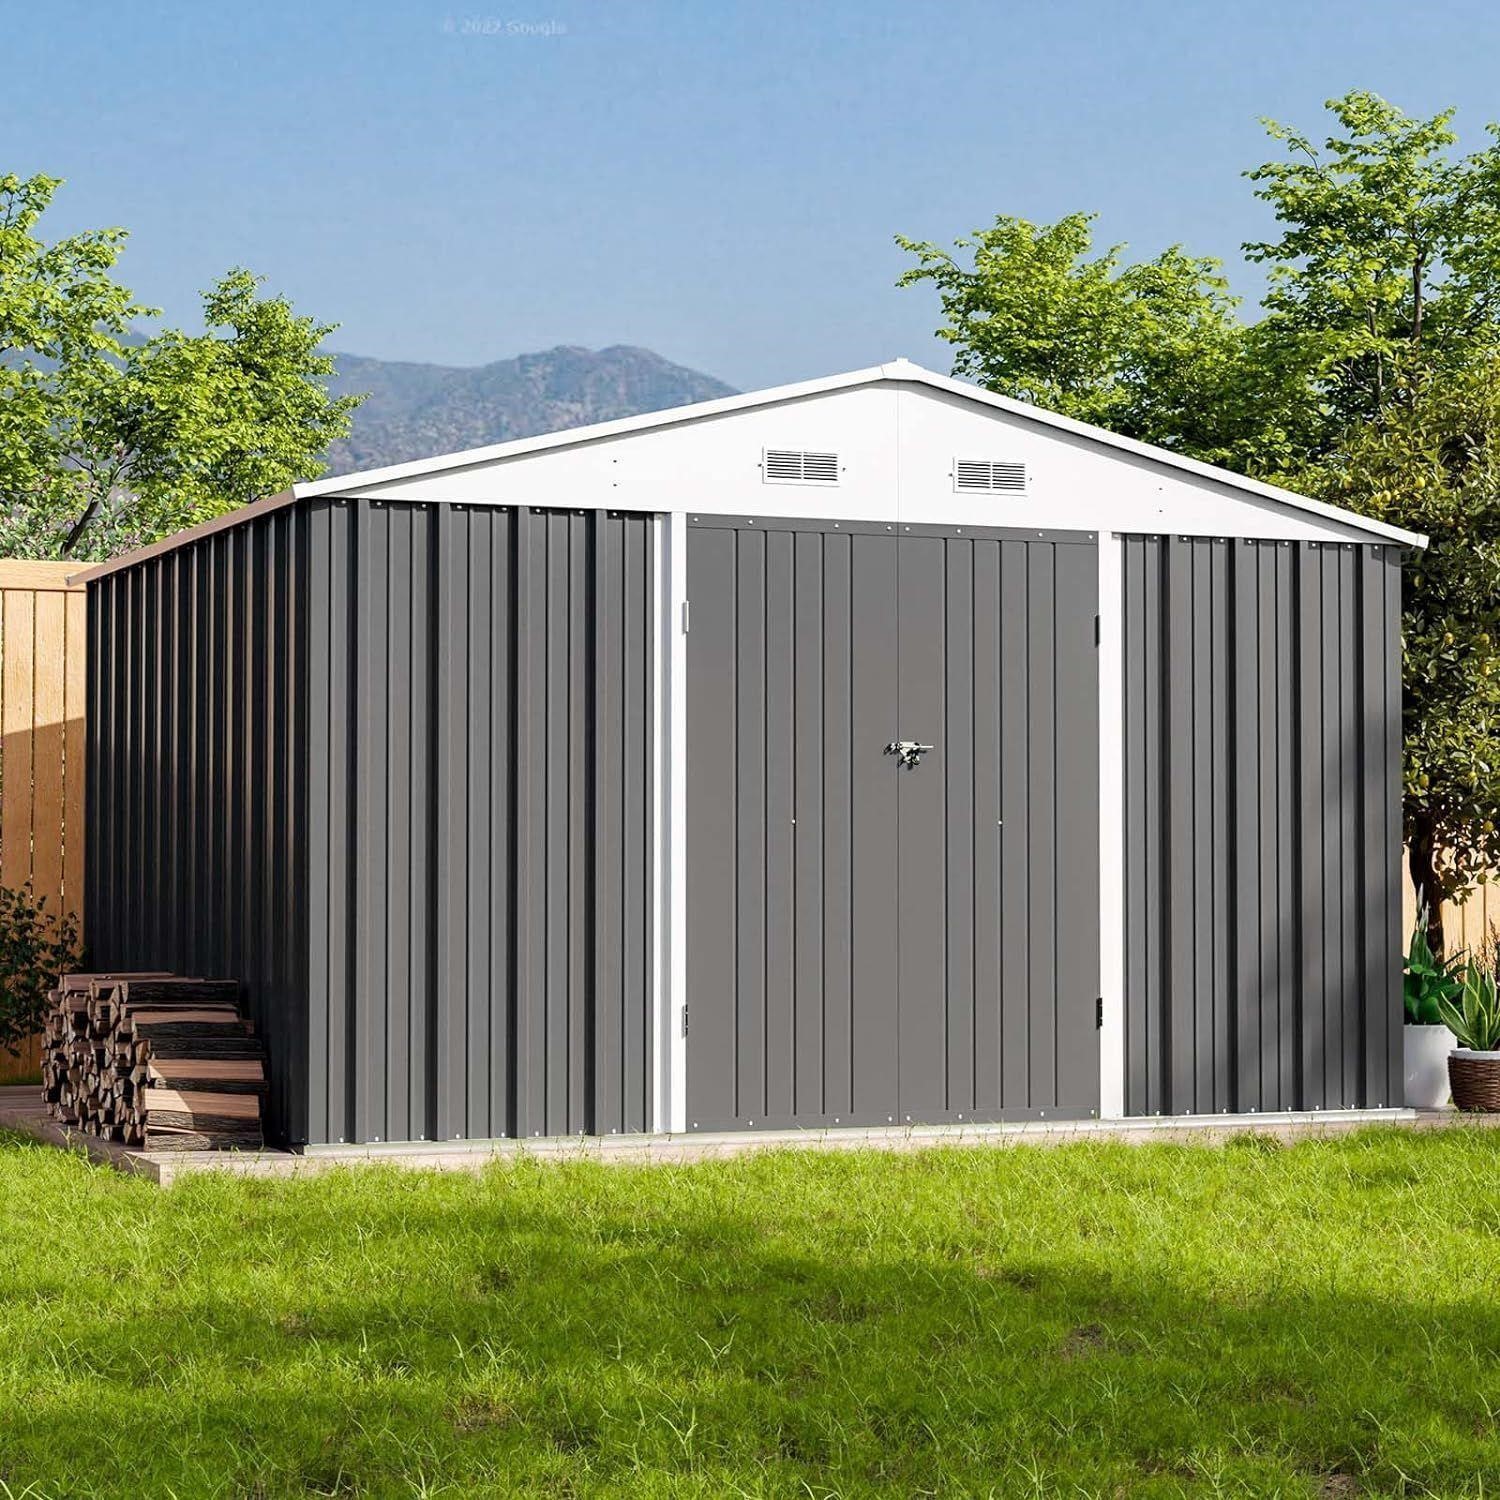 Patiowell 10x8 FT Outdoor Storage Shed